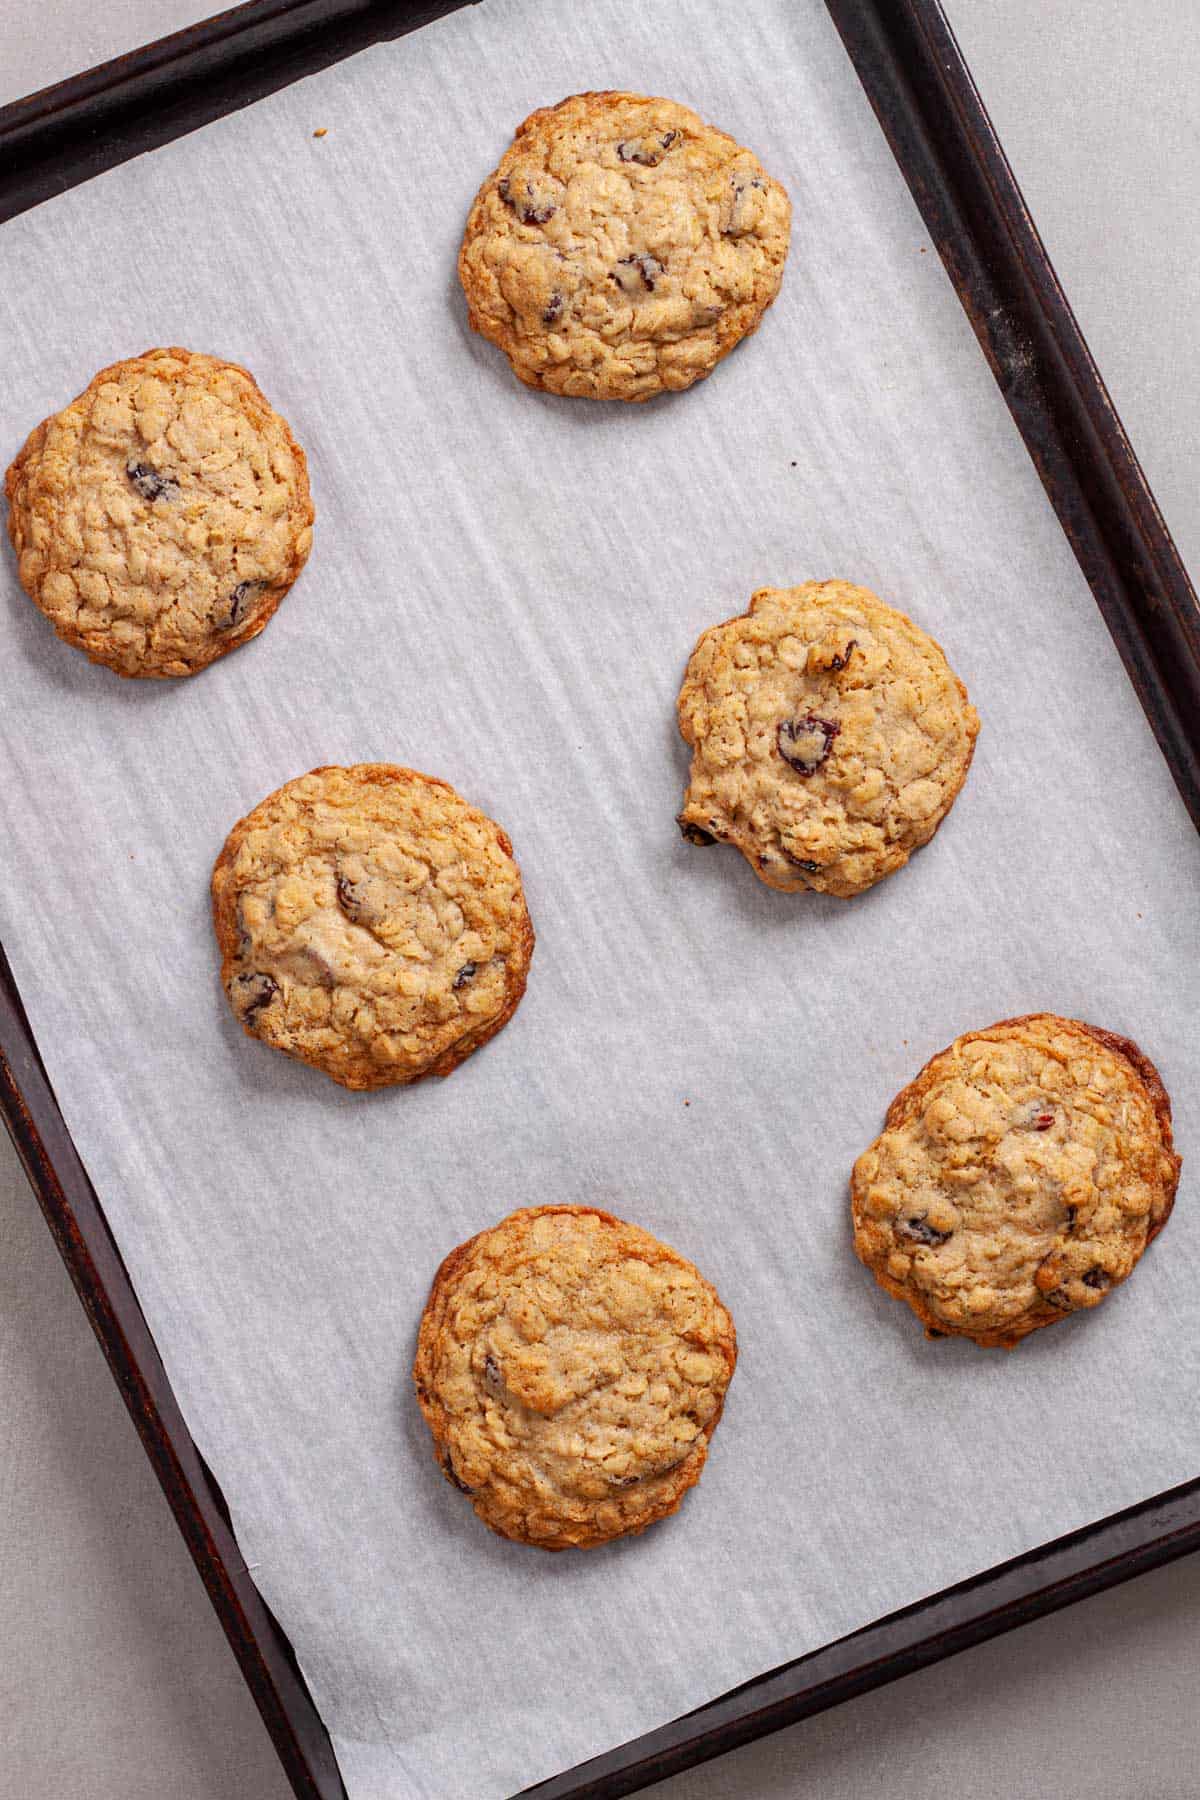 Oatmeal cherry cookies freshly baked on a parchment-lined baking sheet.